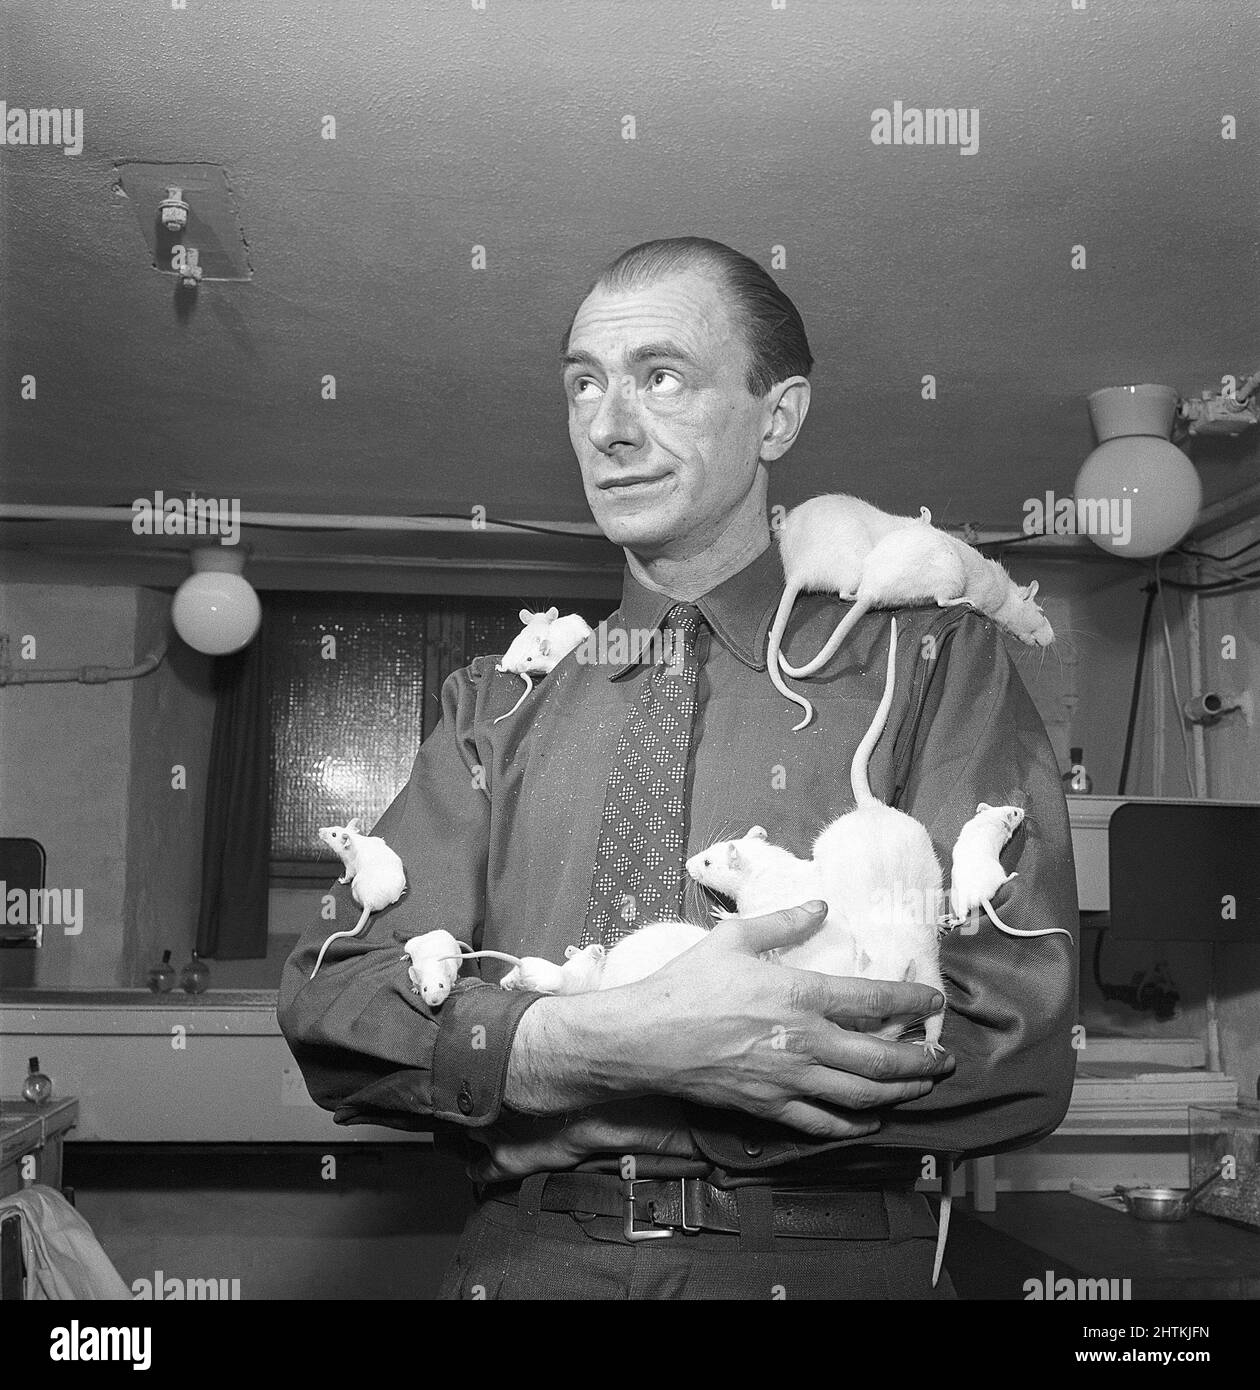 In the 1950s. A man is visibly comforable to let rats climb and sit on him. Sweden 1951. Kristoffersson Ref BE48-10 Stock Photo